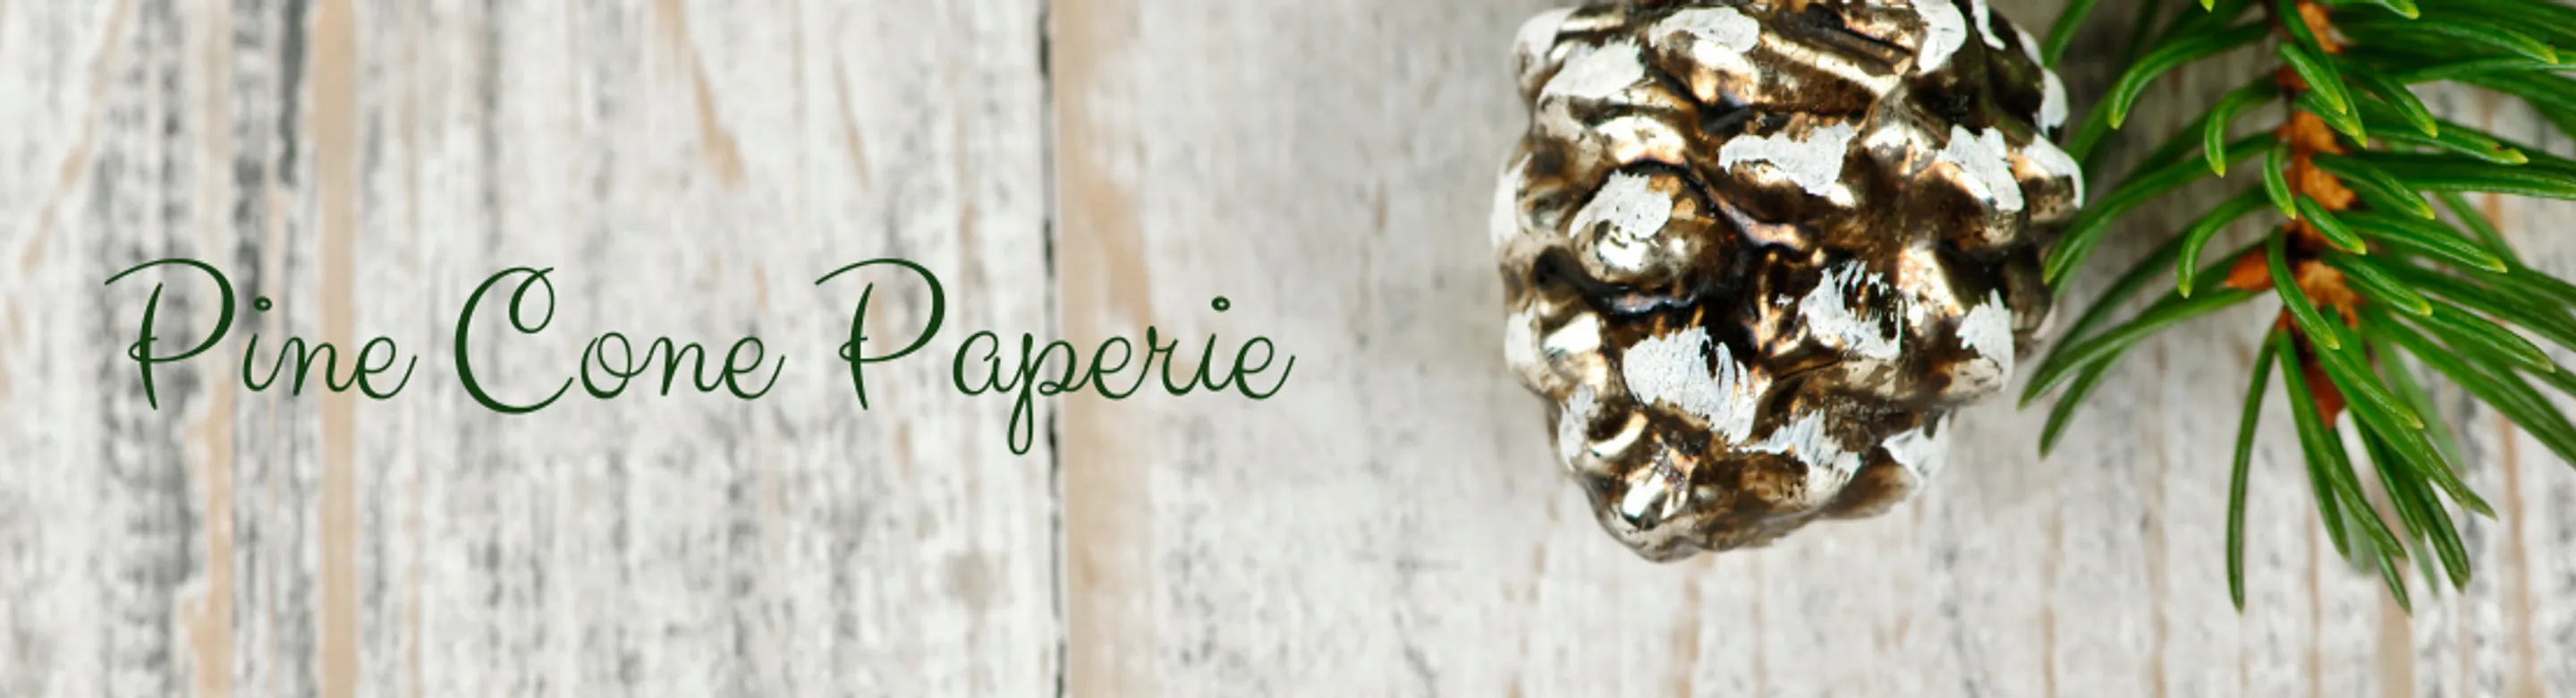 Pine Cone Paperie